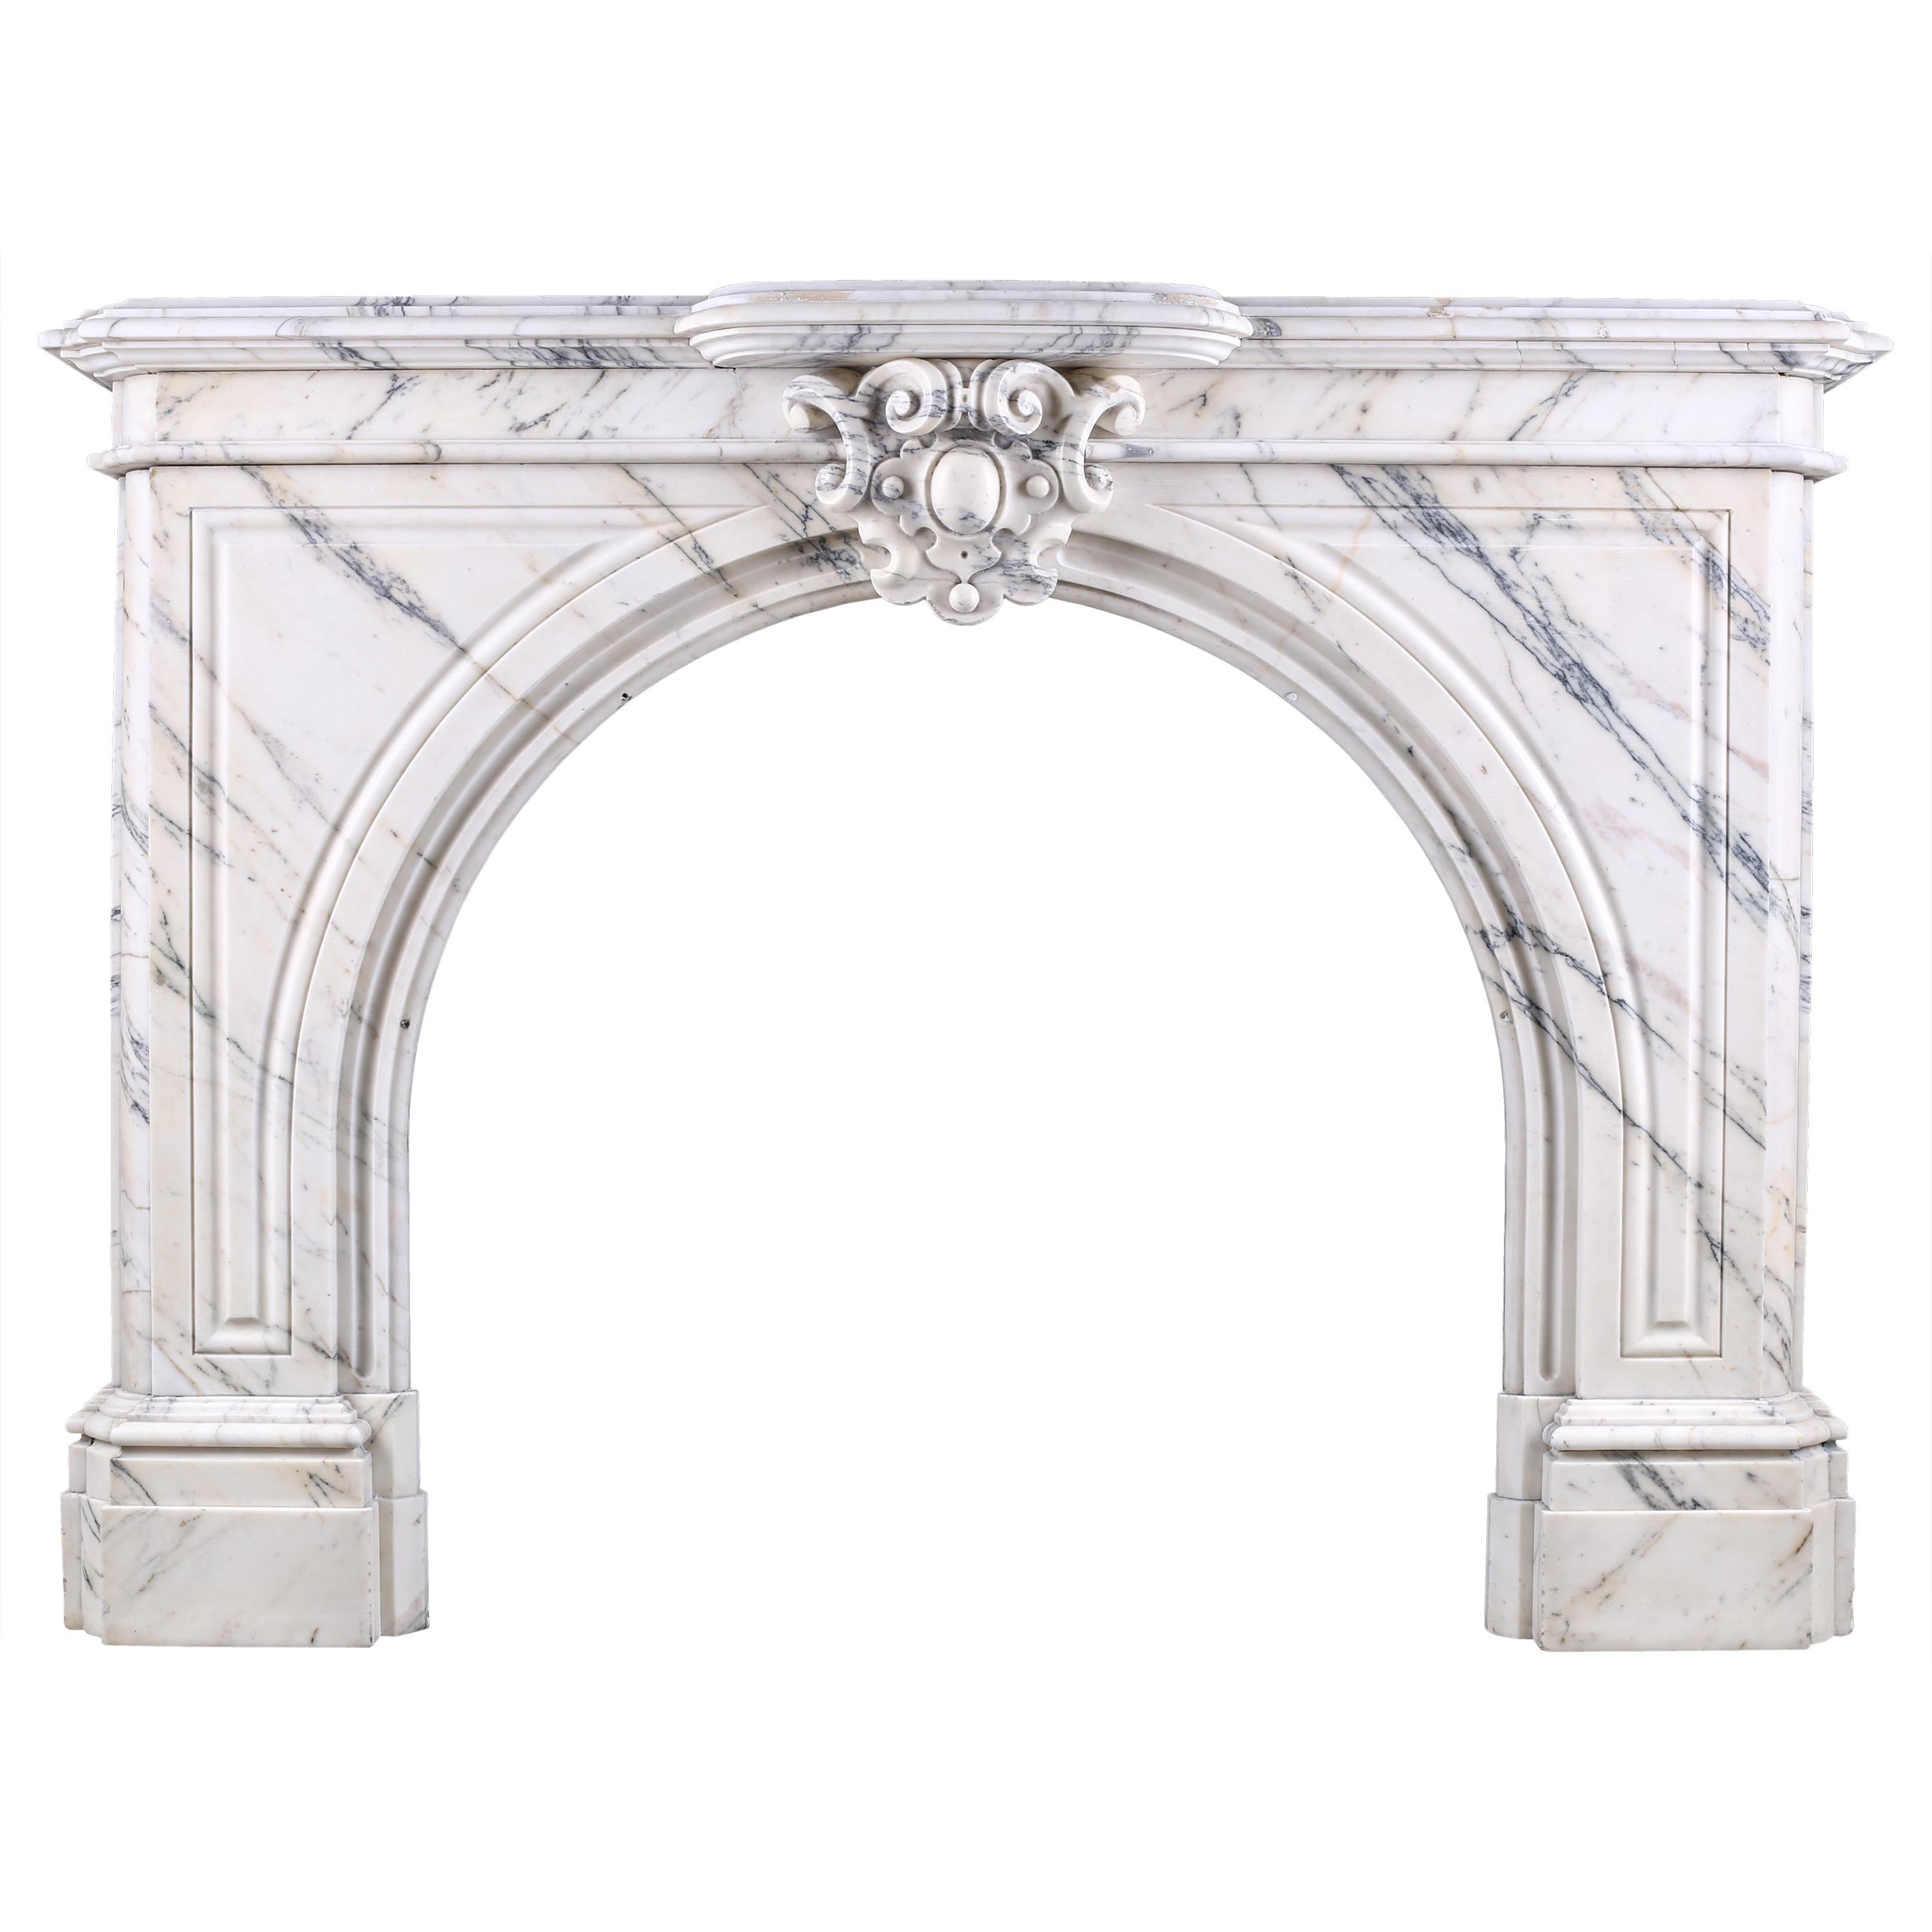 Elegant Arched Pavonazza Marble Antique Chimneypiece, Belgian Mid-19th Century For Sale